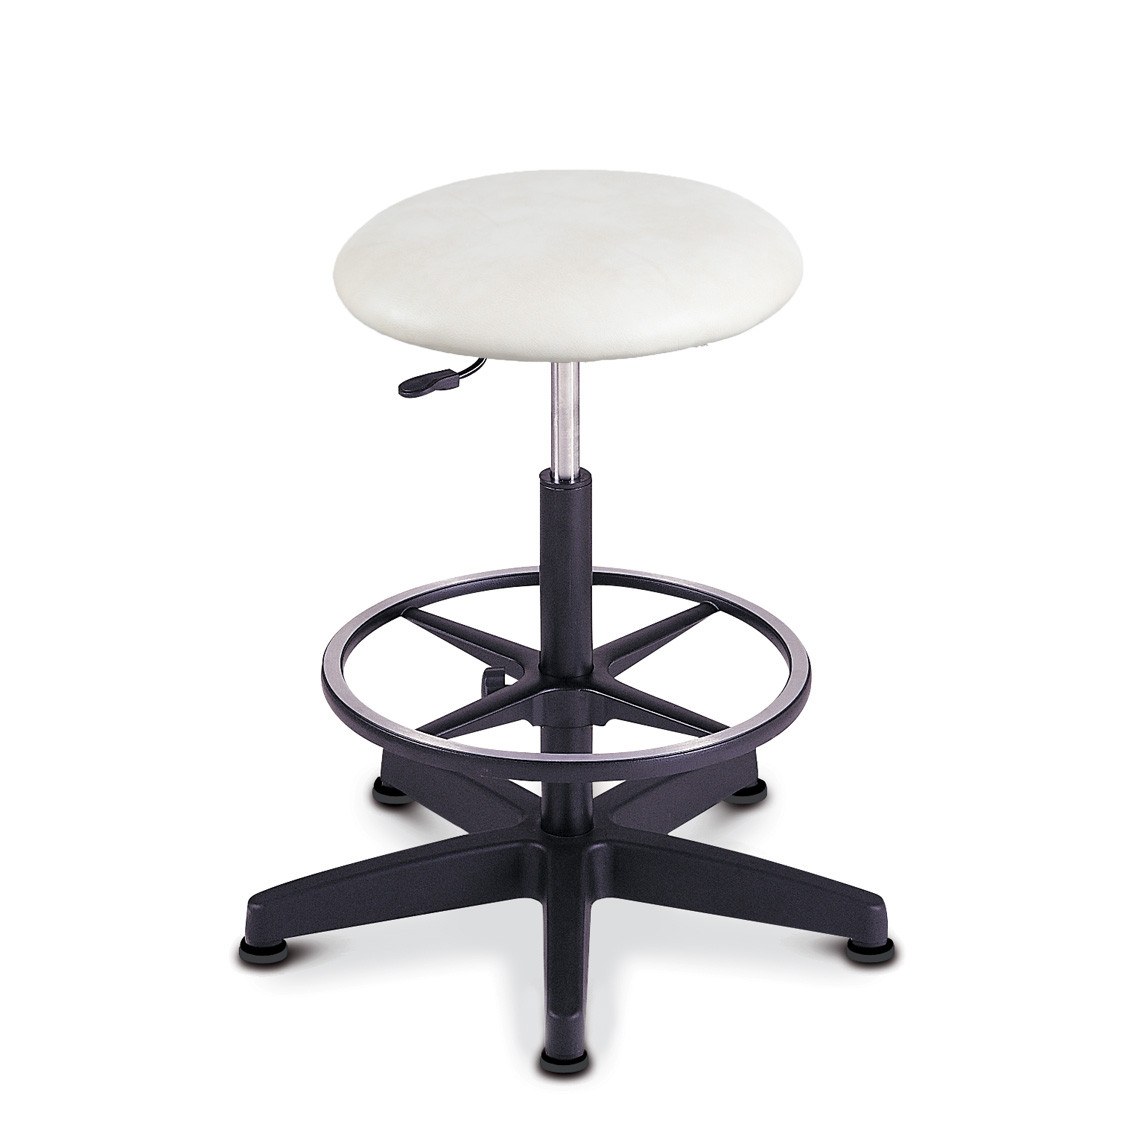 Stools with footrests